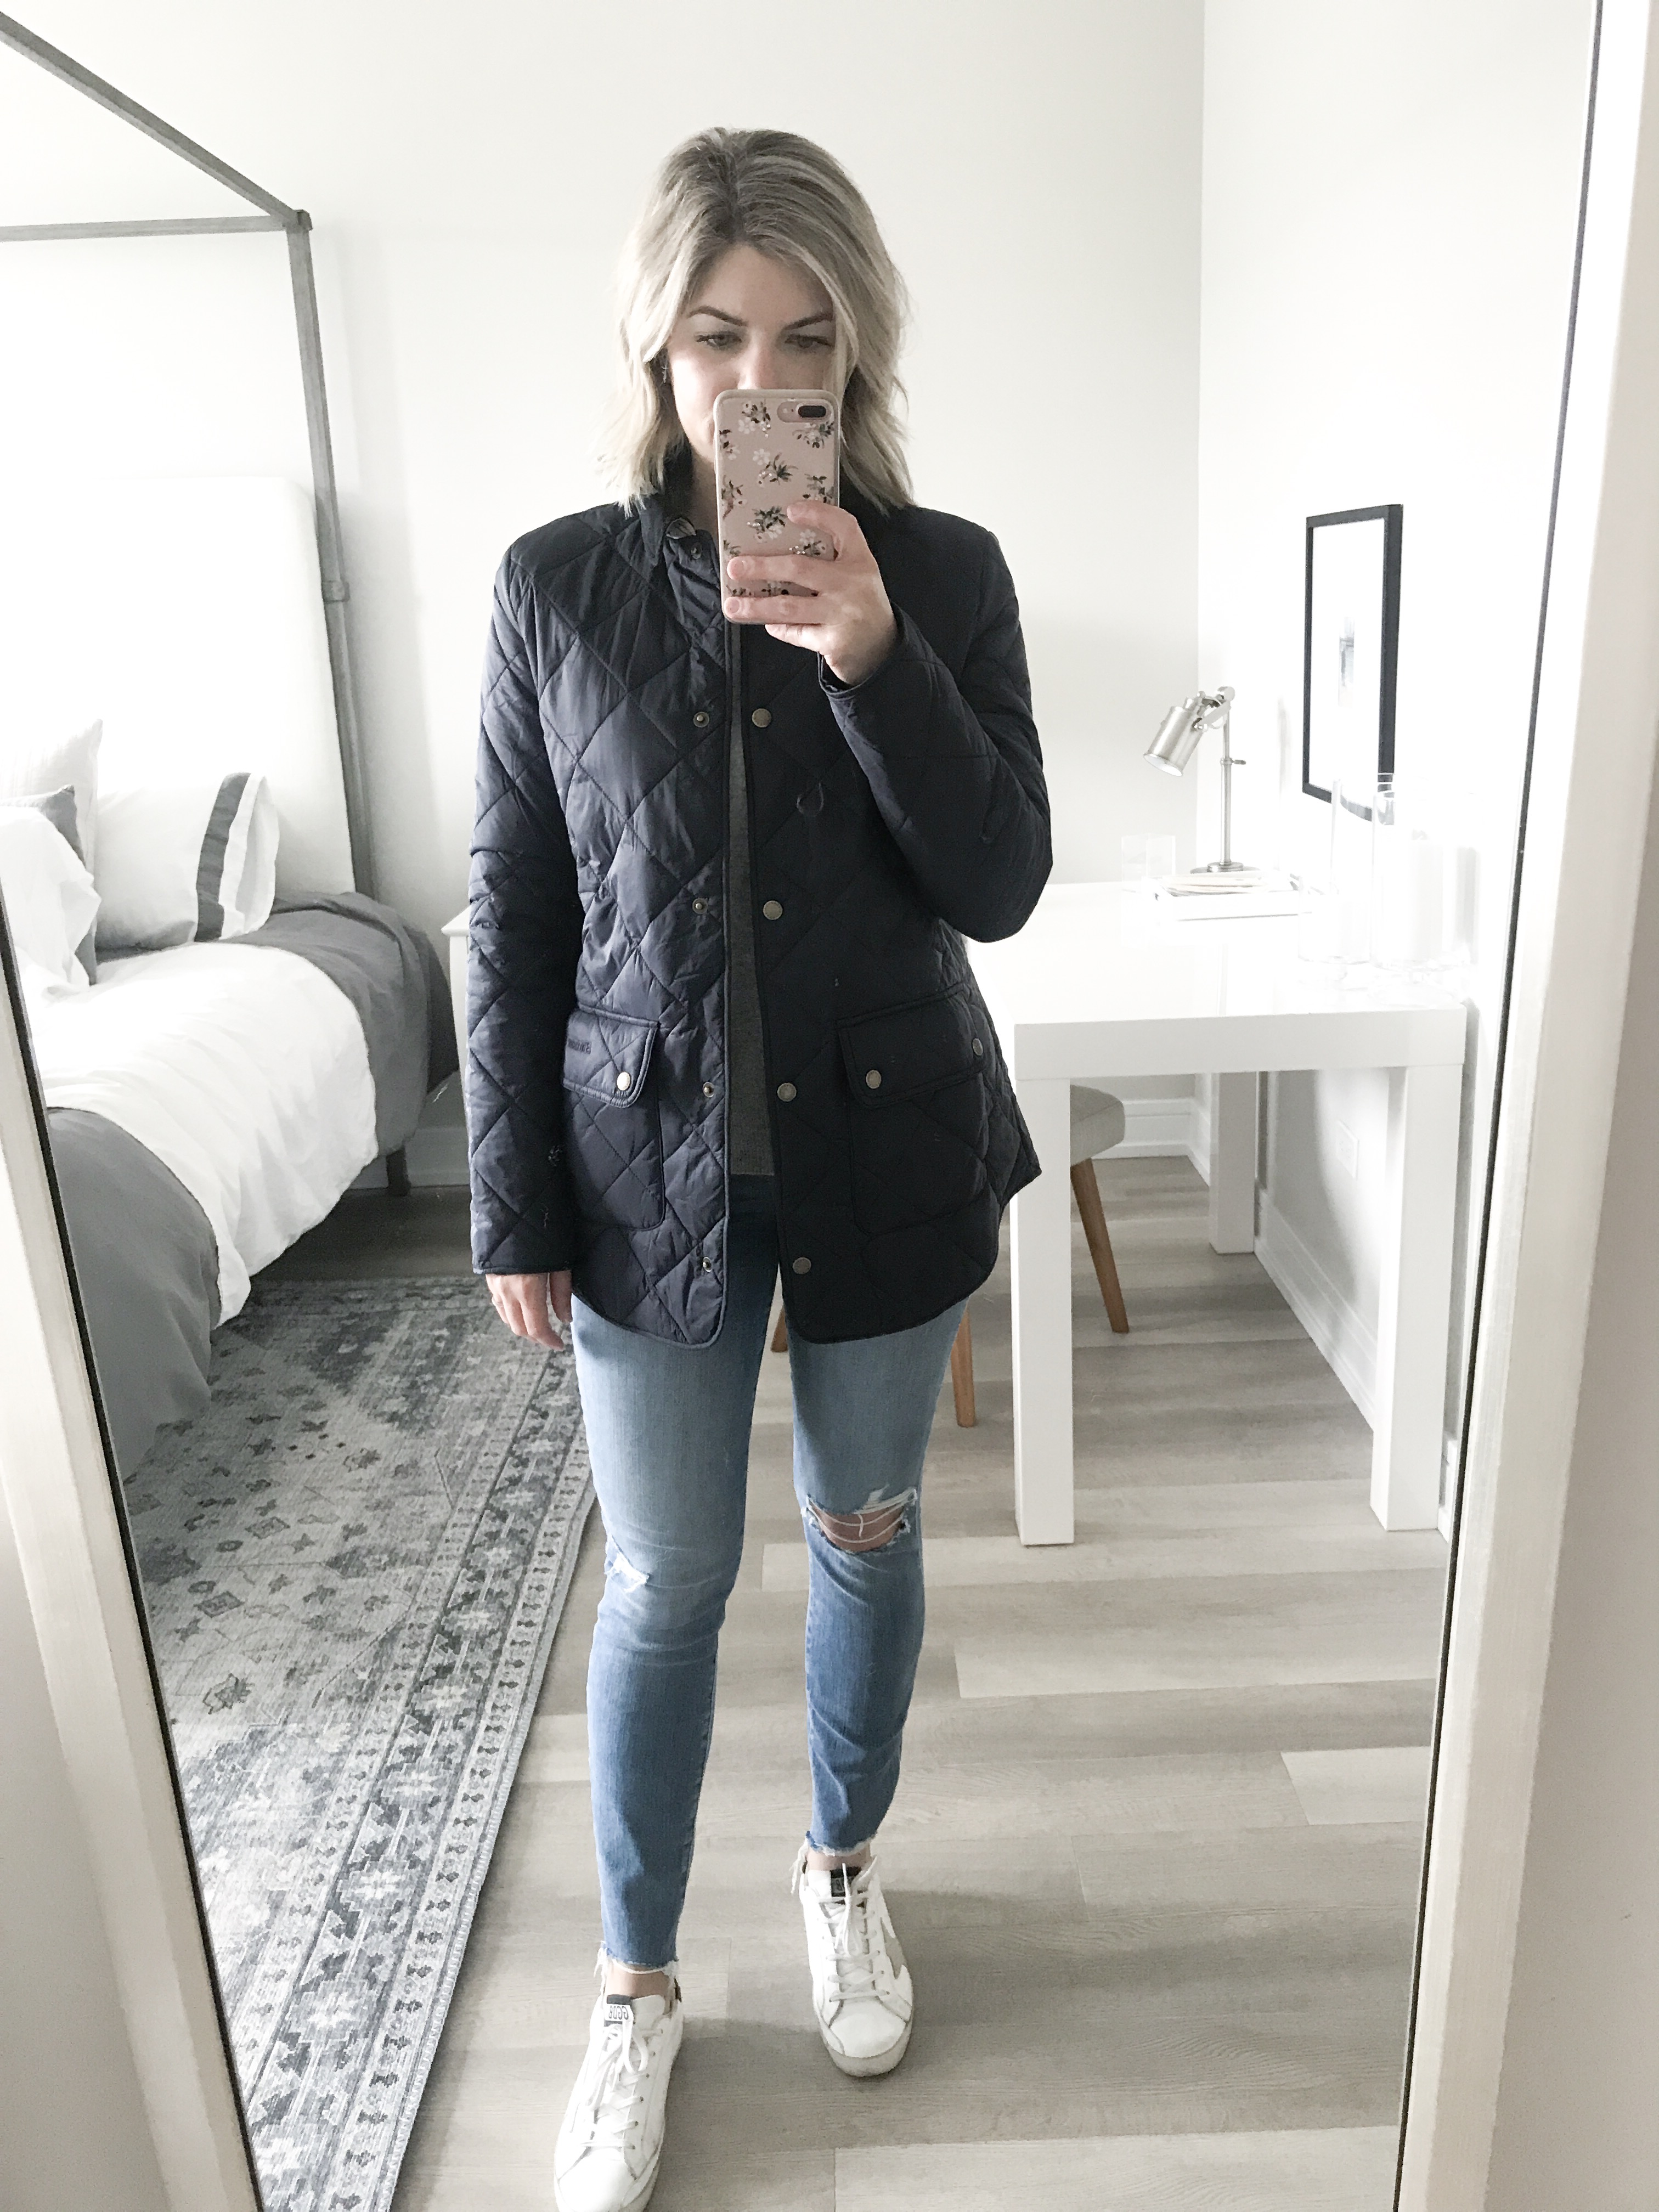 Barbour jacket from the Nordstrom sale 